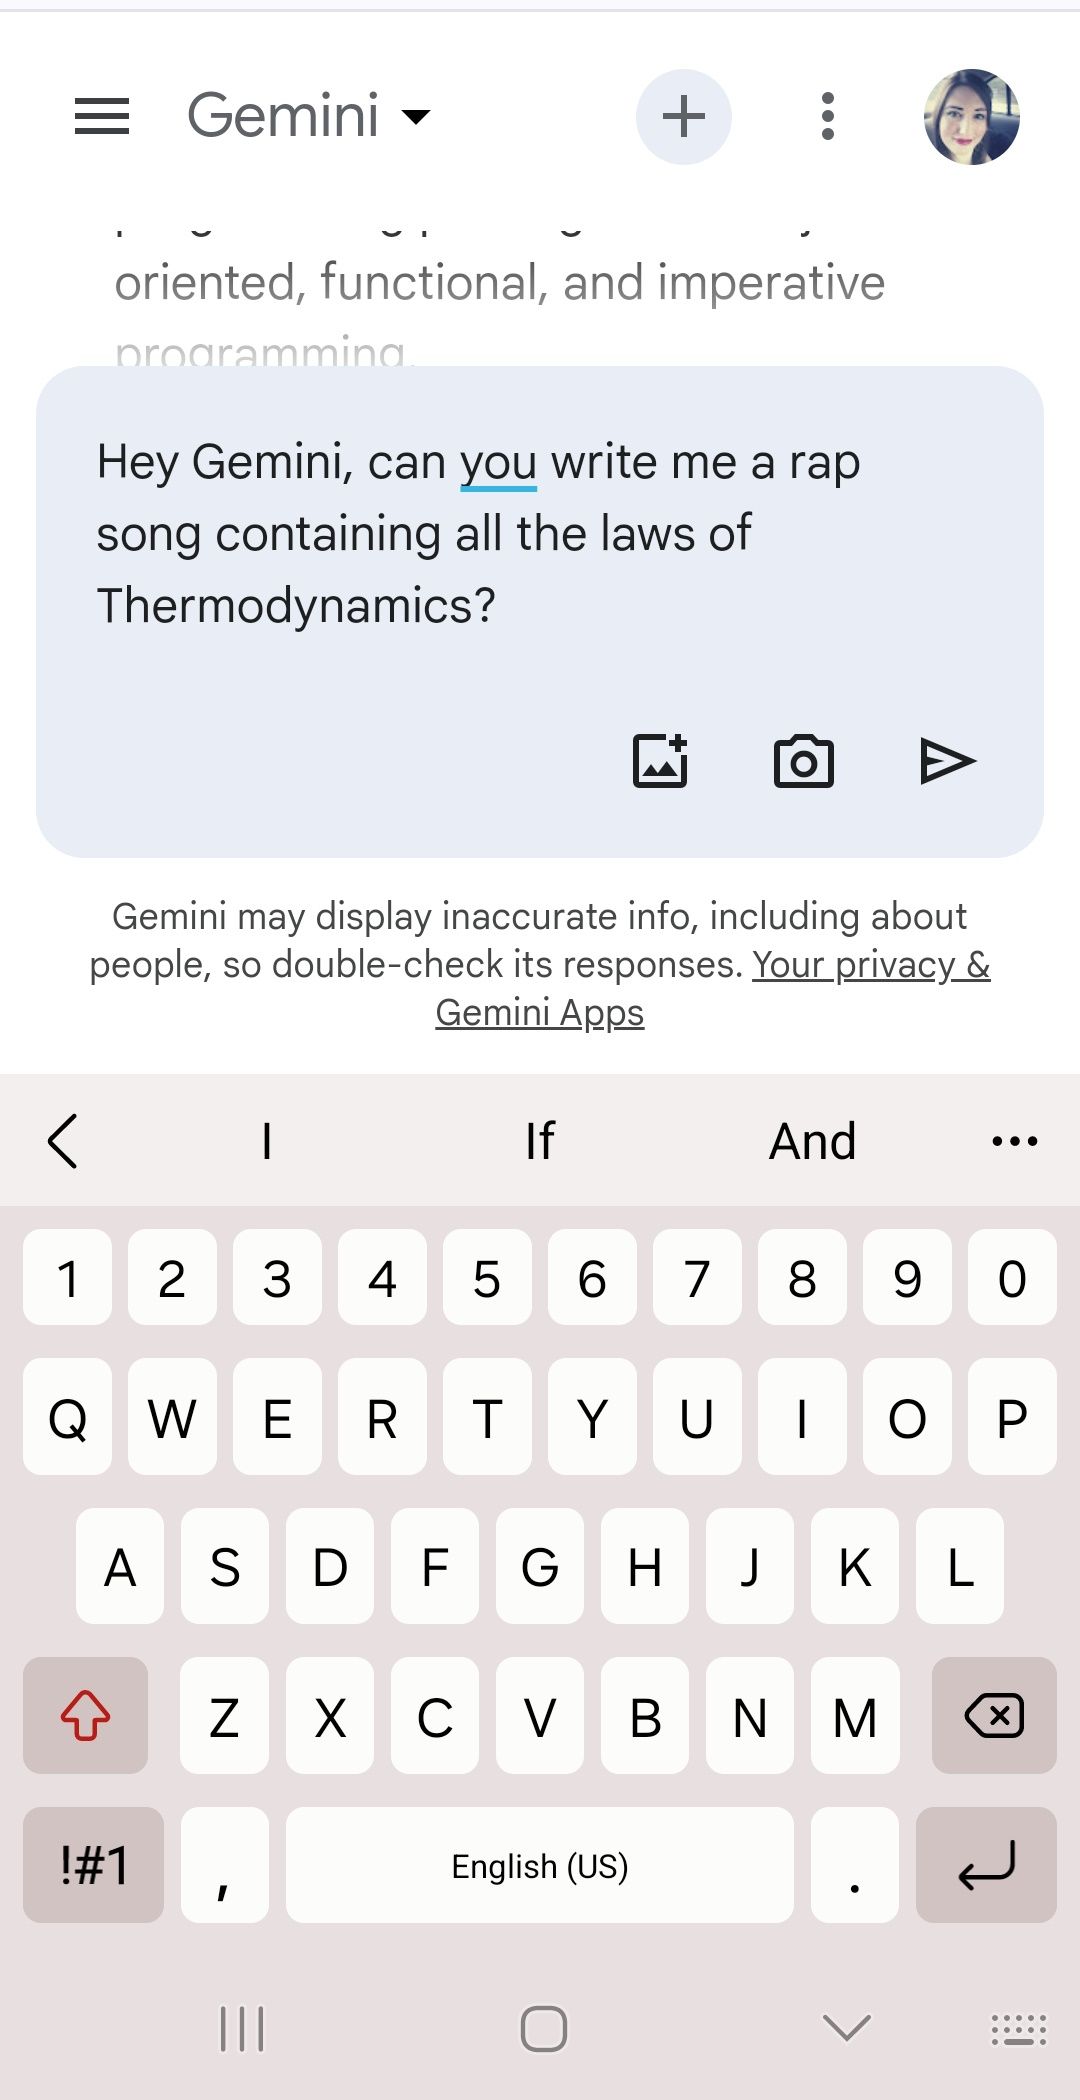 google gemini rap song request inputted into prompt box